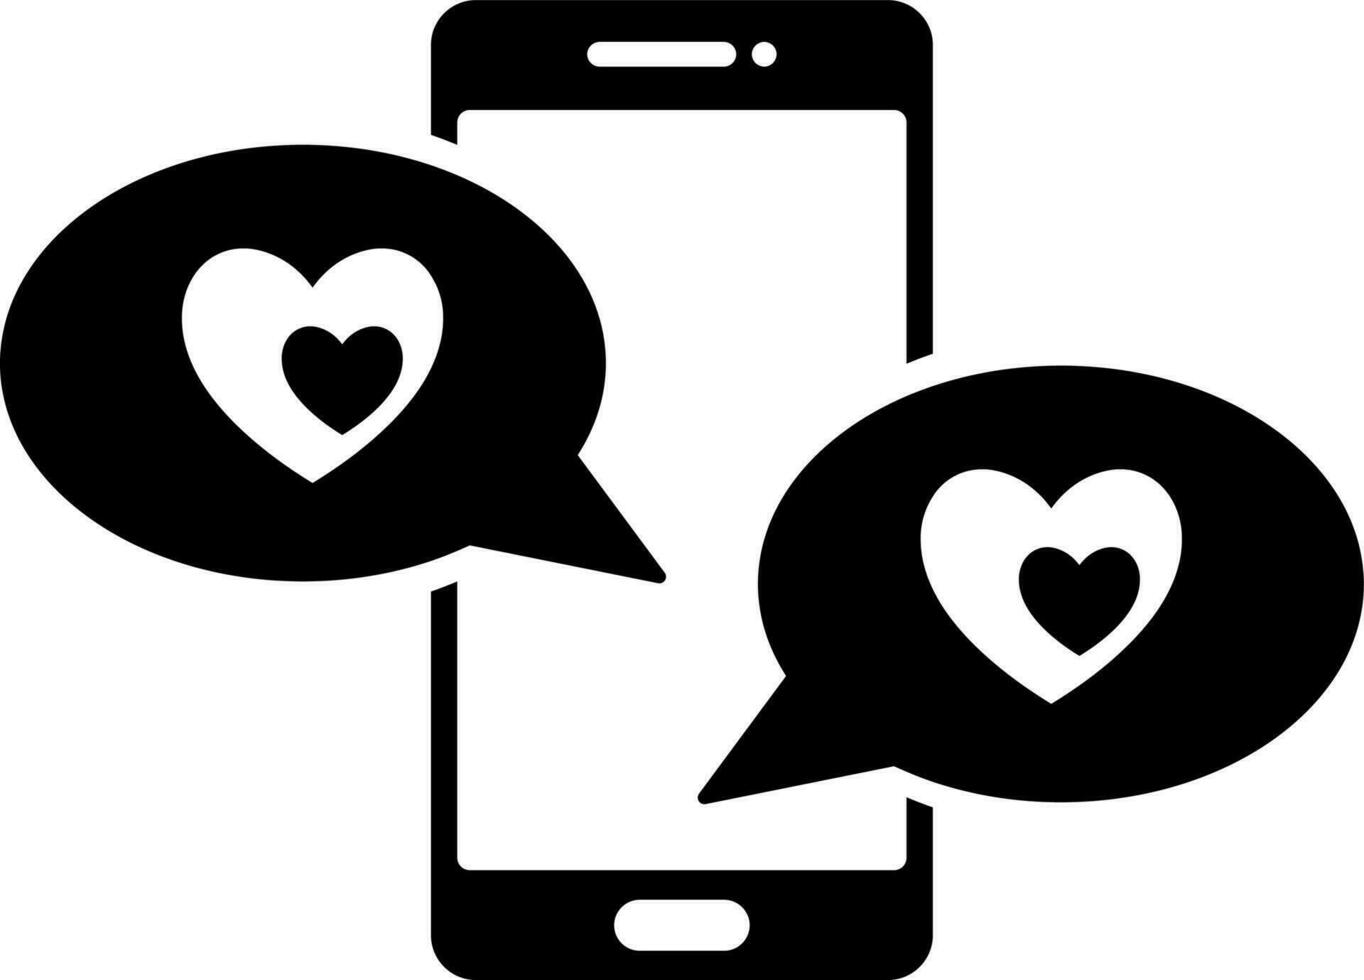 Love message or chatting from smartphone icon. vector